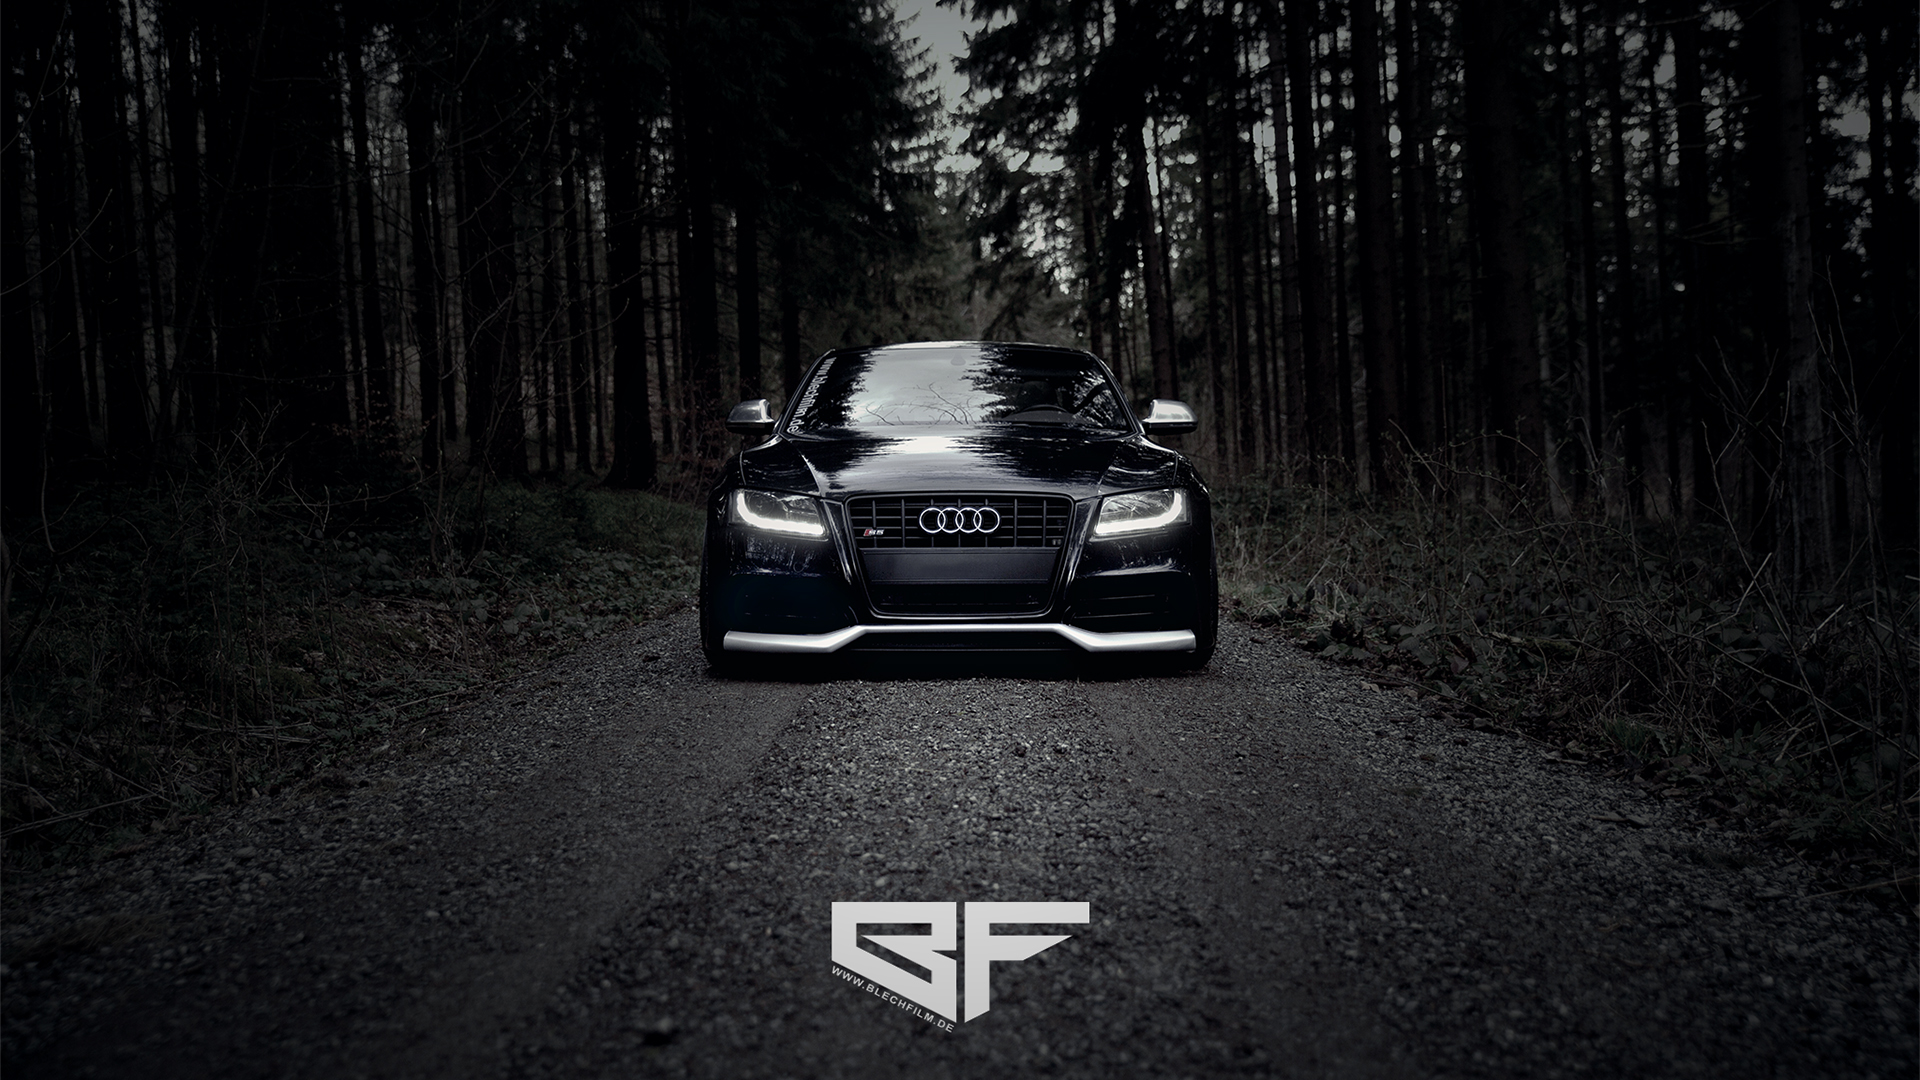 Audi S5 Forest